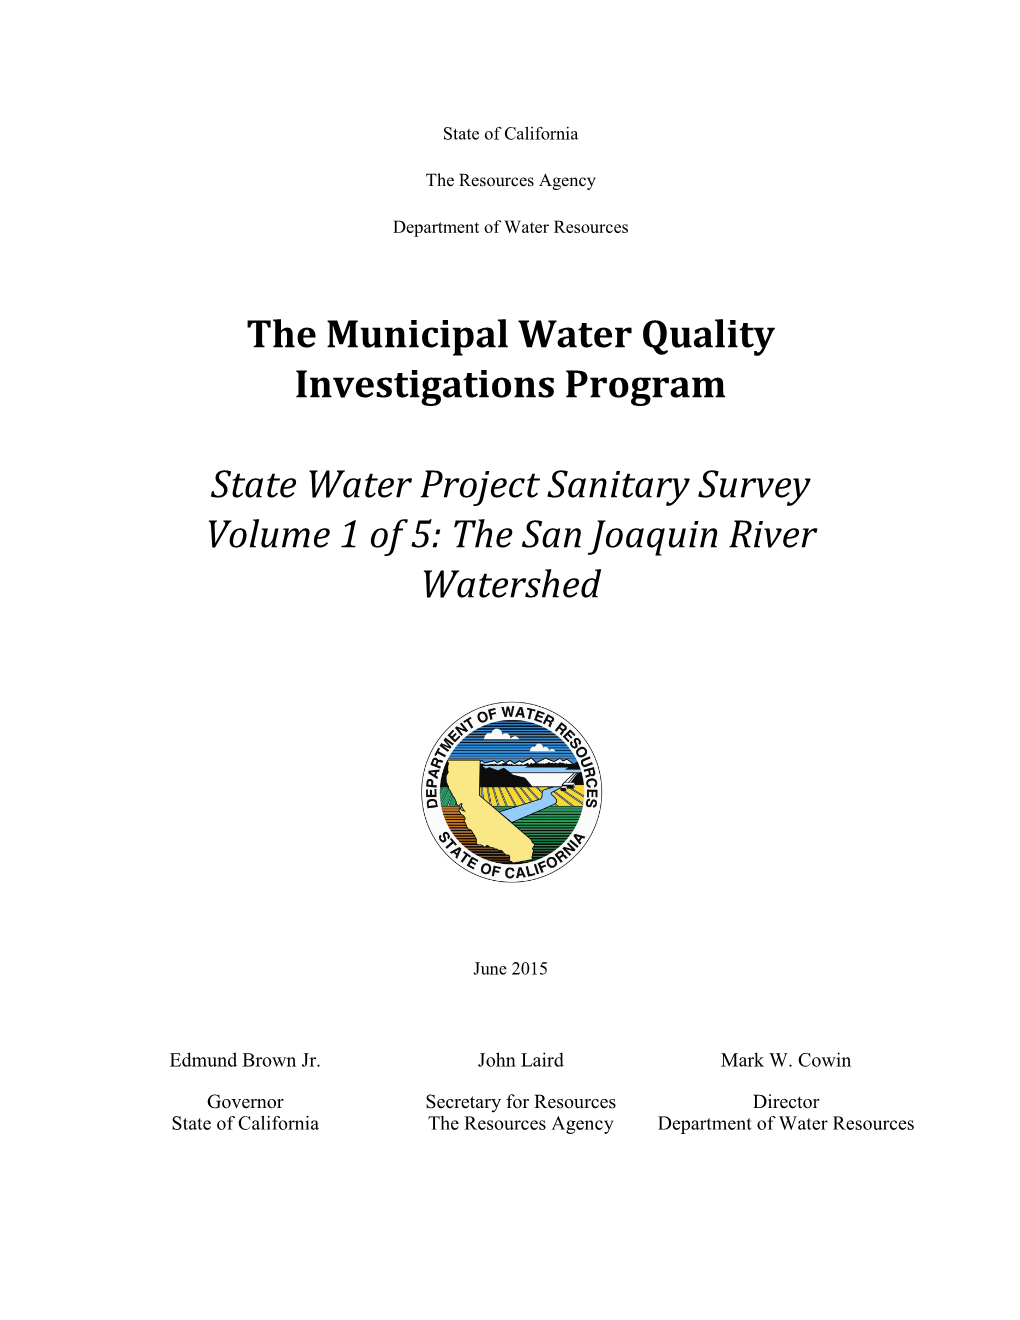 San Joaquin River Watershed Sanitary Survey Focuses on Evaluating the Potential Contaminant Sources in the Watershed That Could Adversely Affect Water Quality